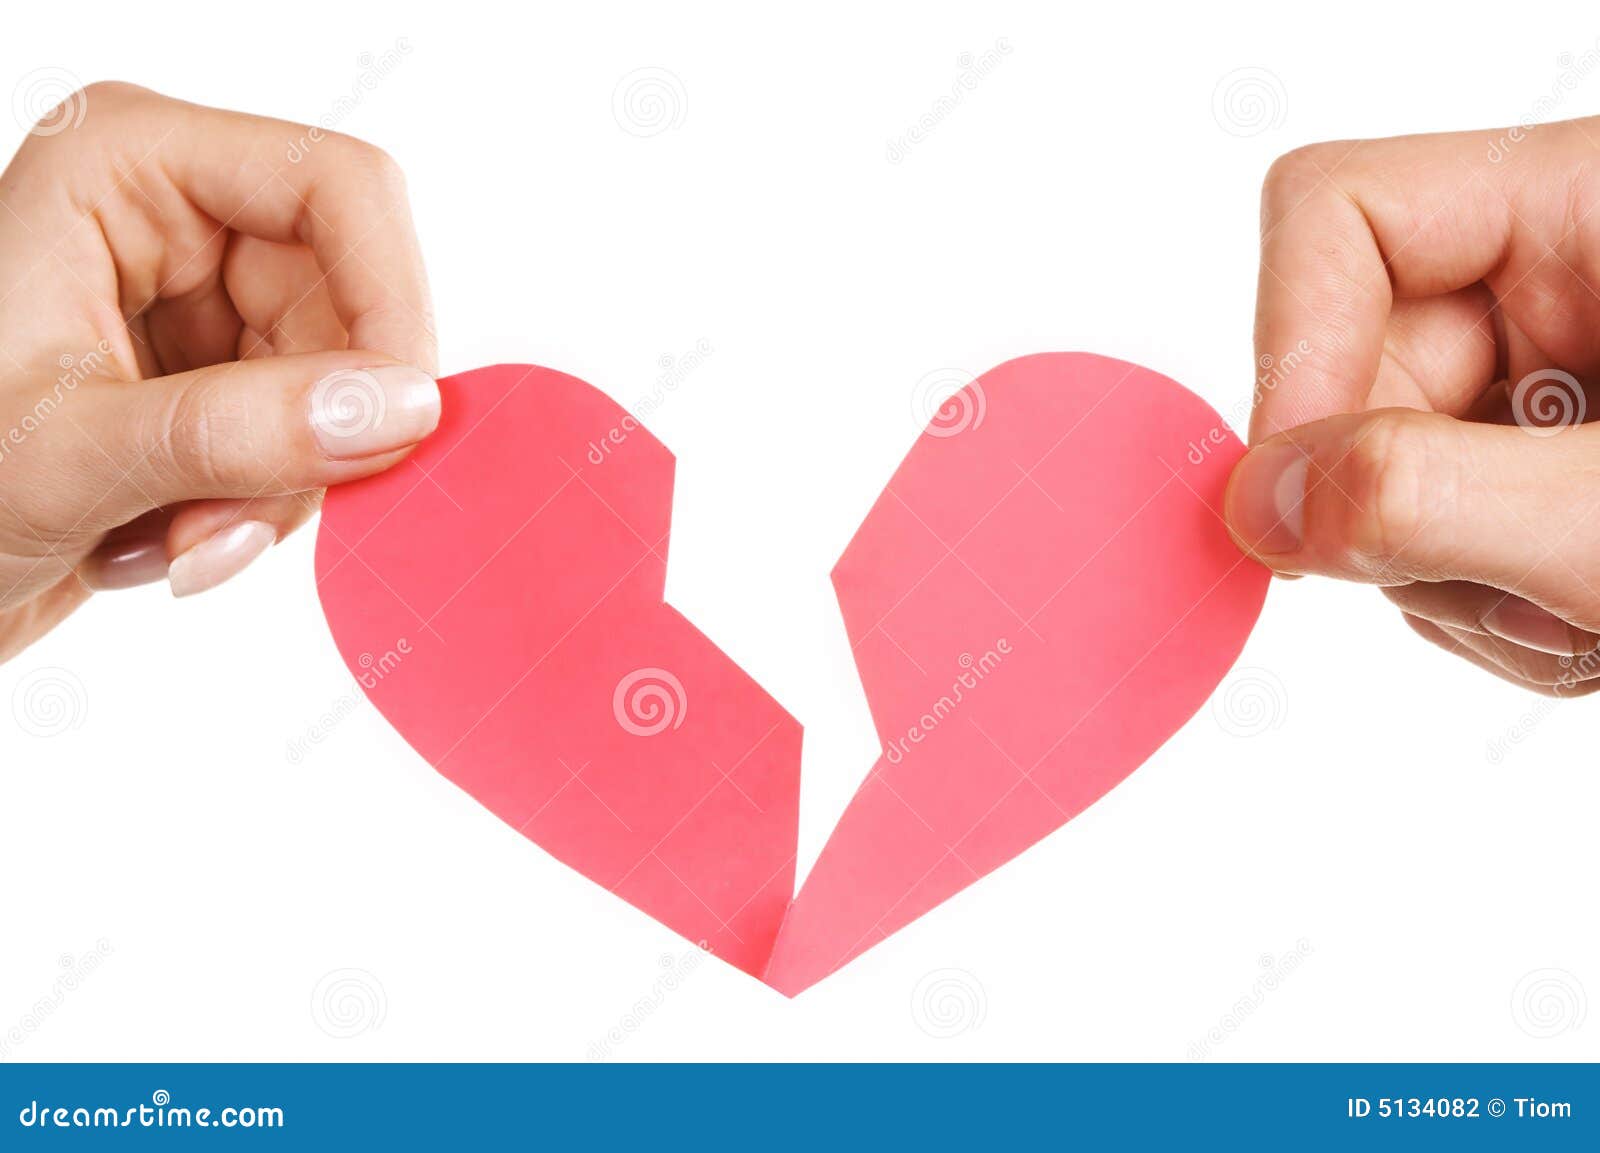 Broken Heart Key Holder Stock Photo, Picture and Royalty Free